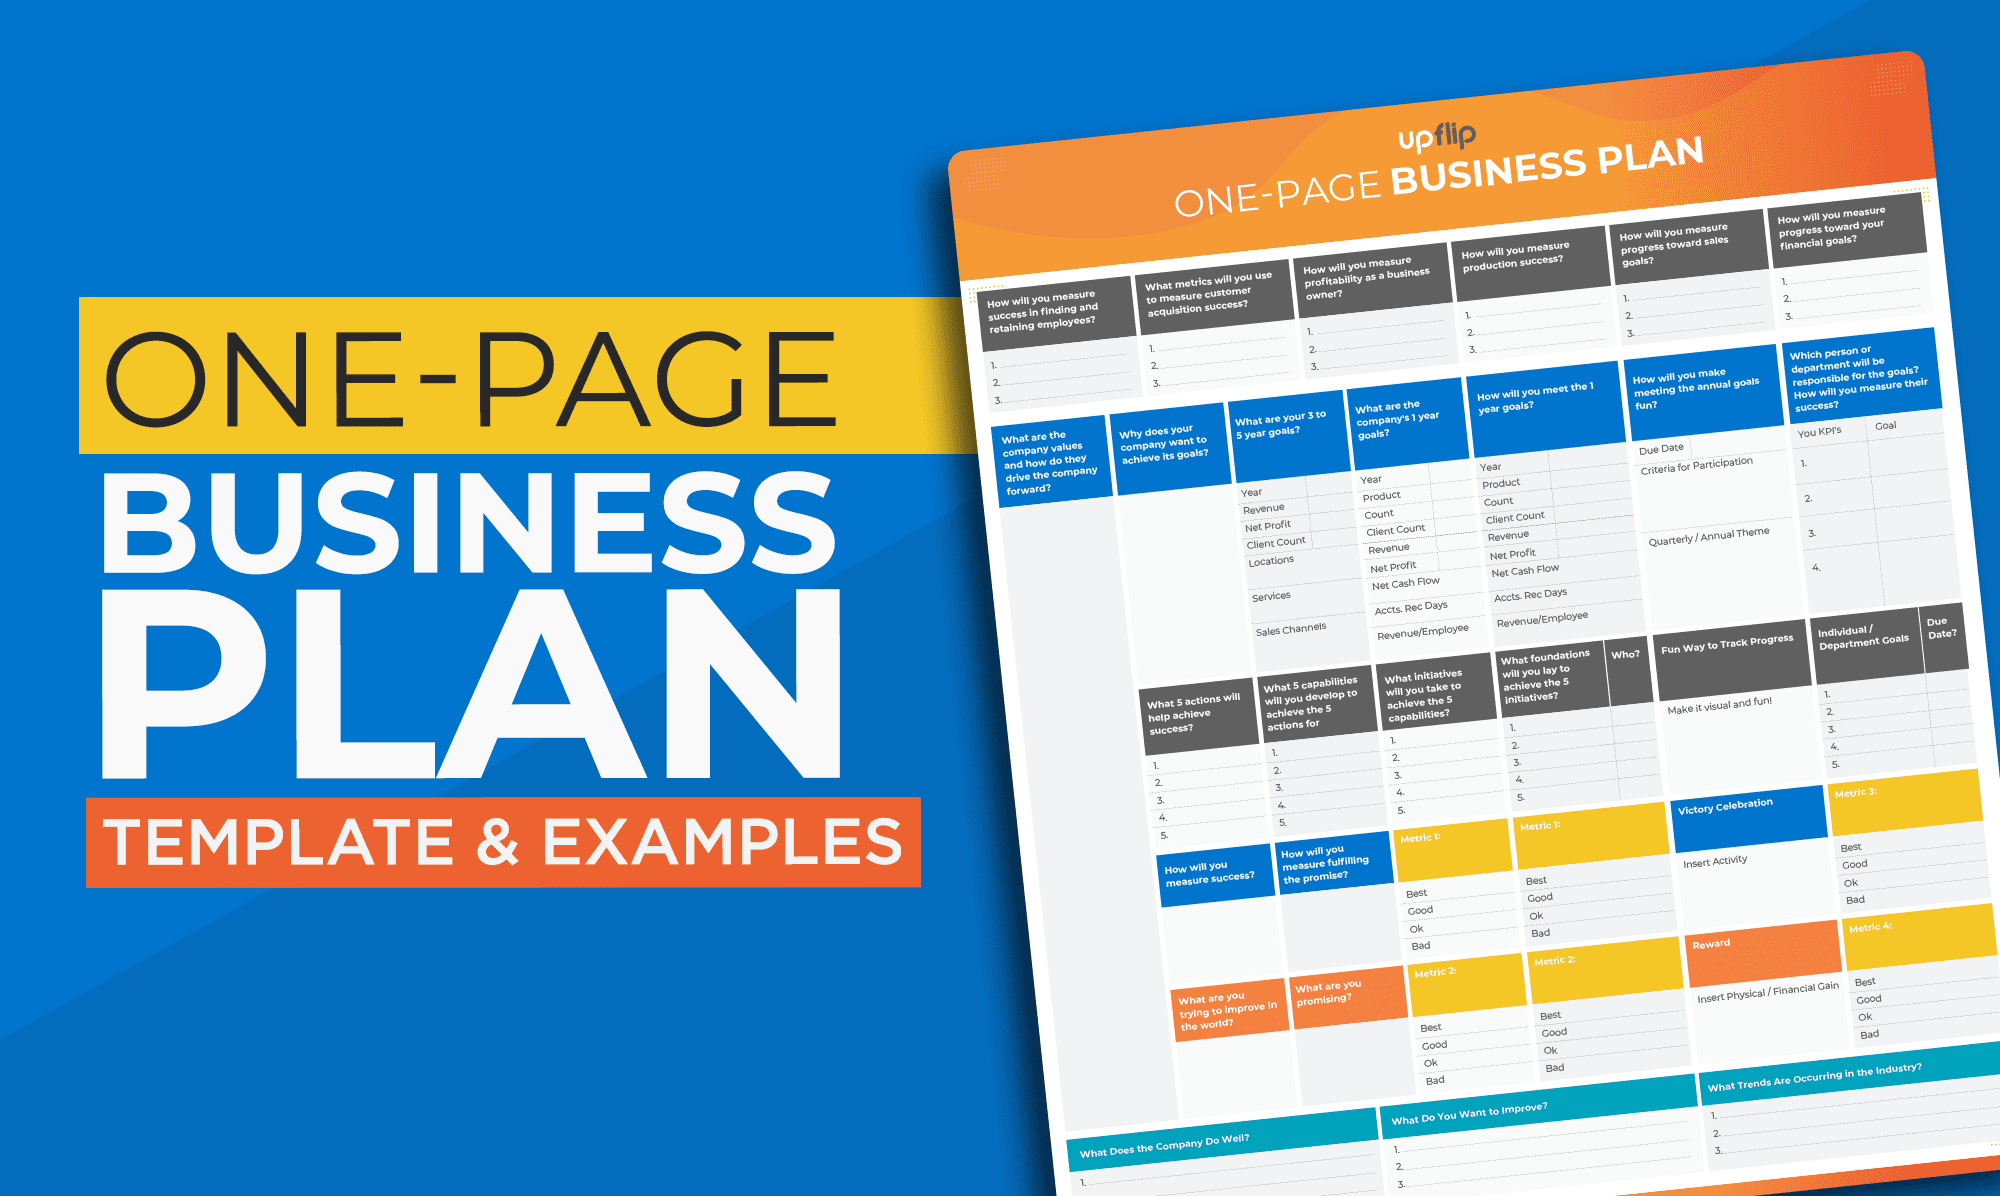 One-page business plan document